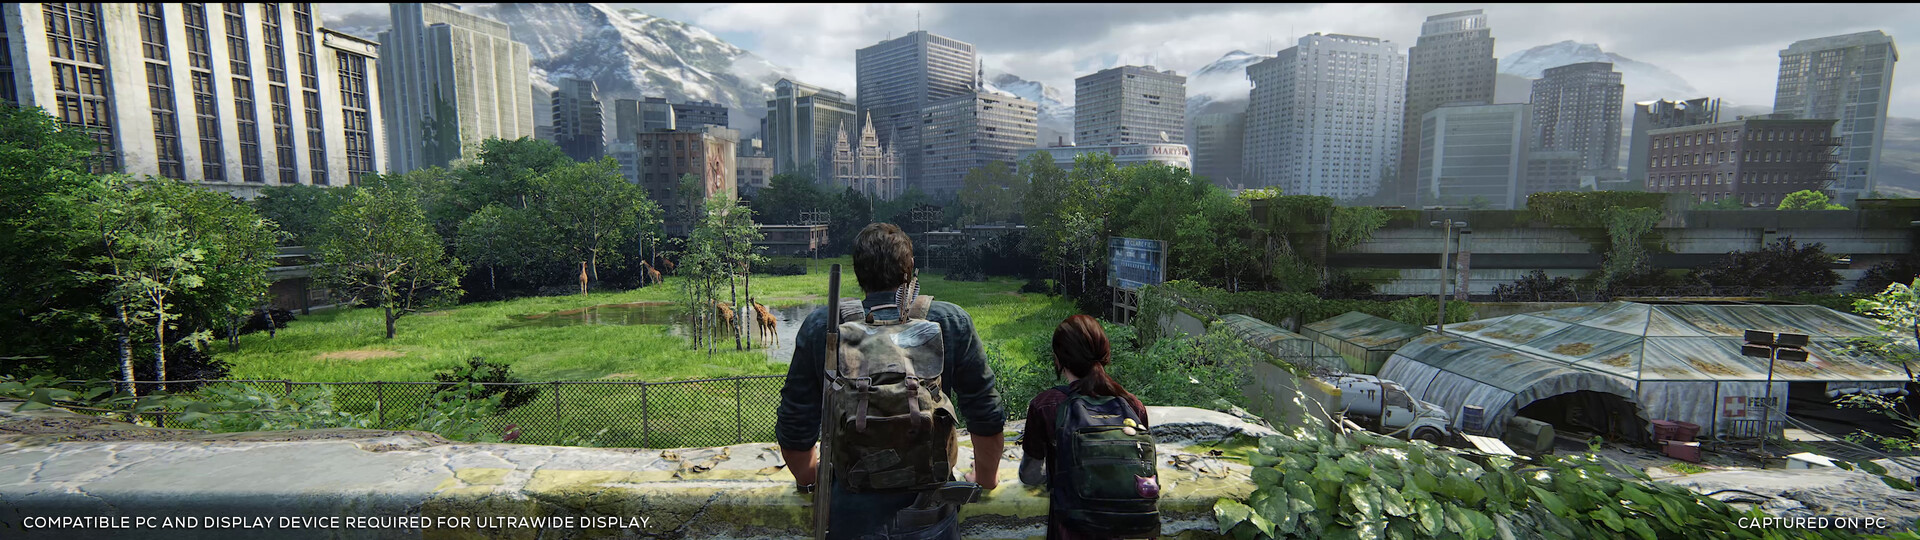 You can get The Last of Us Part I on PC for 20% off on Steam right now!  Relive this classic, or play through its iconic story for the first time by